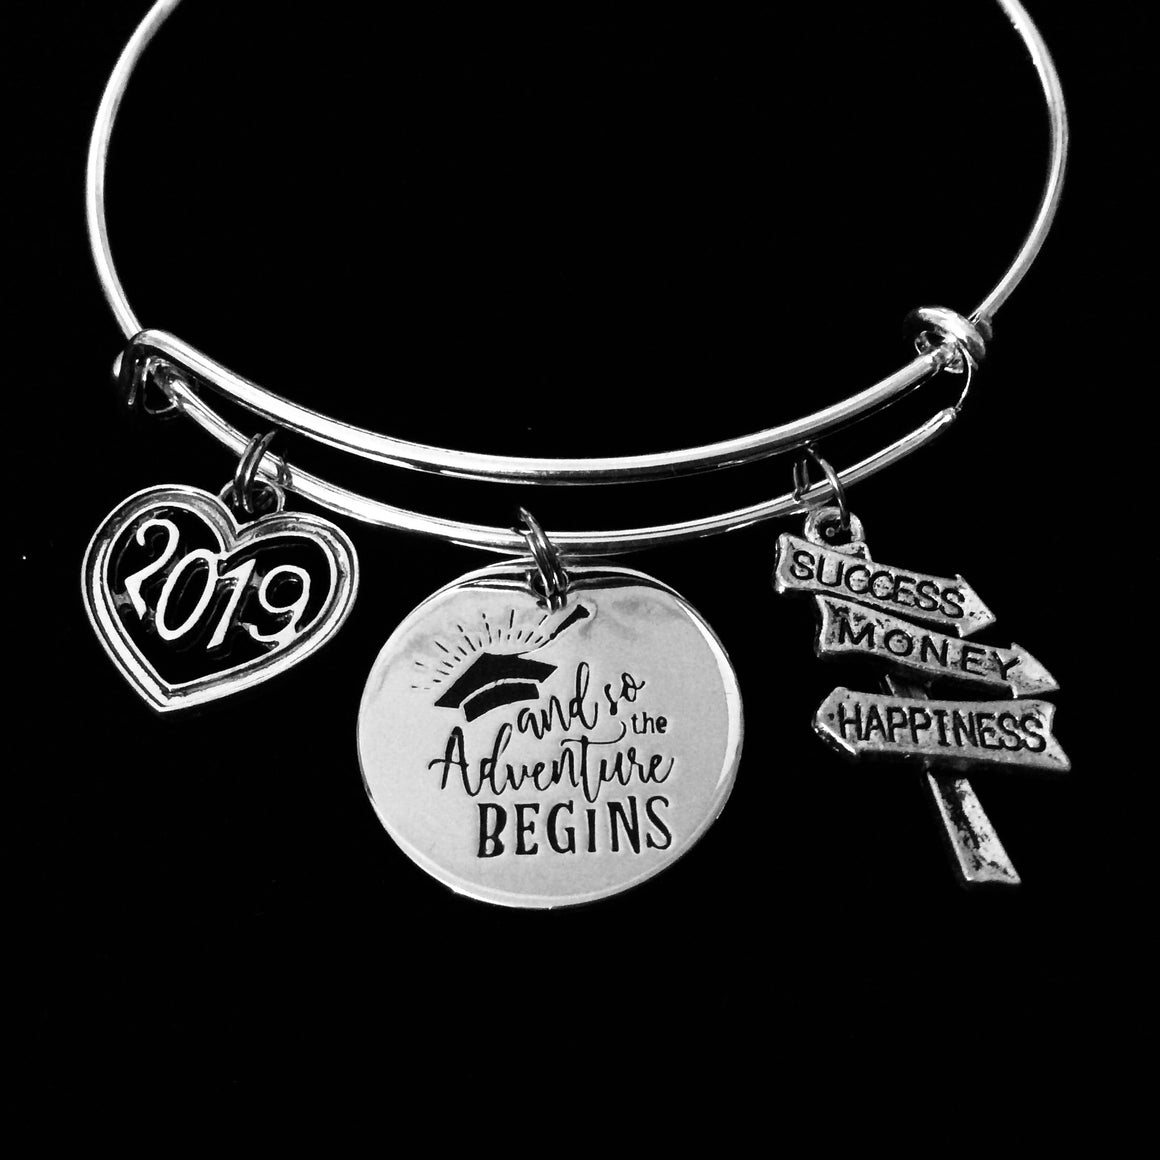 2019 Graduation Expandable Charm Bracelet So The Adventure Begins Silver Adjustable Bangle One Size Fits All Gift